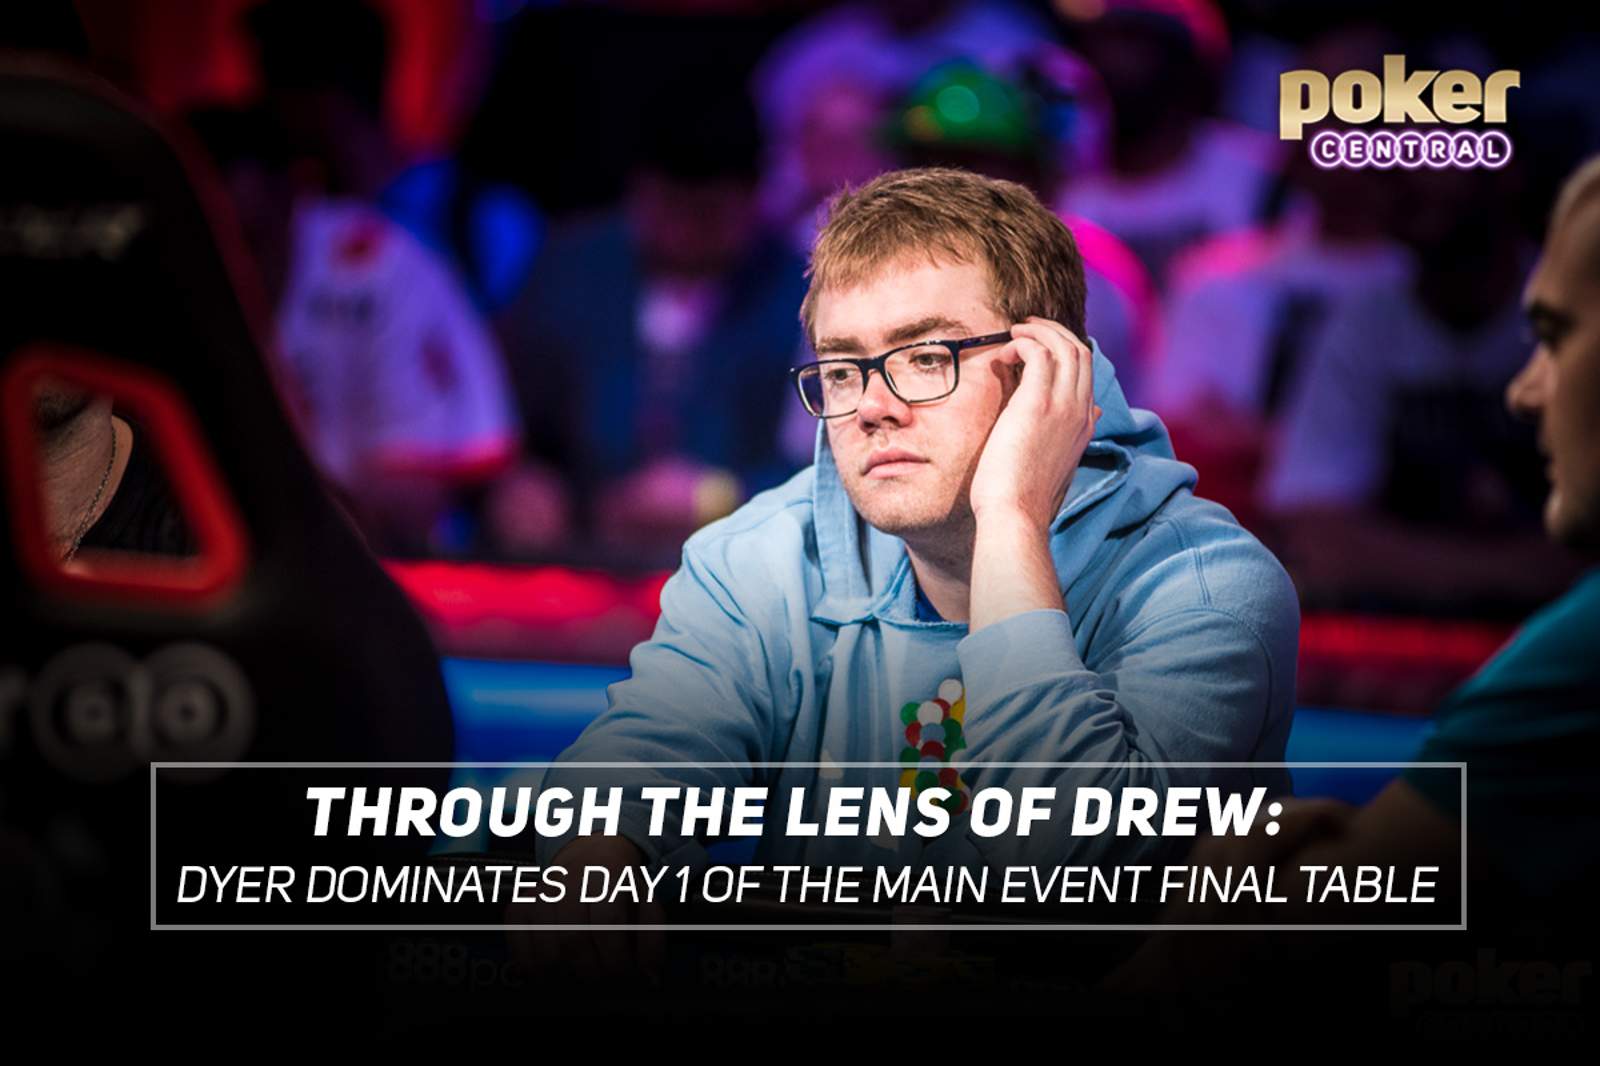 Through The Lens of Drew - Dyer Dominates Day 1 of the Main Event Final Table